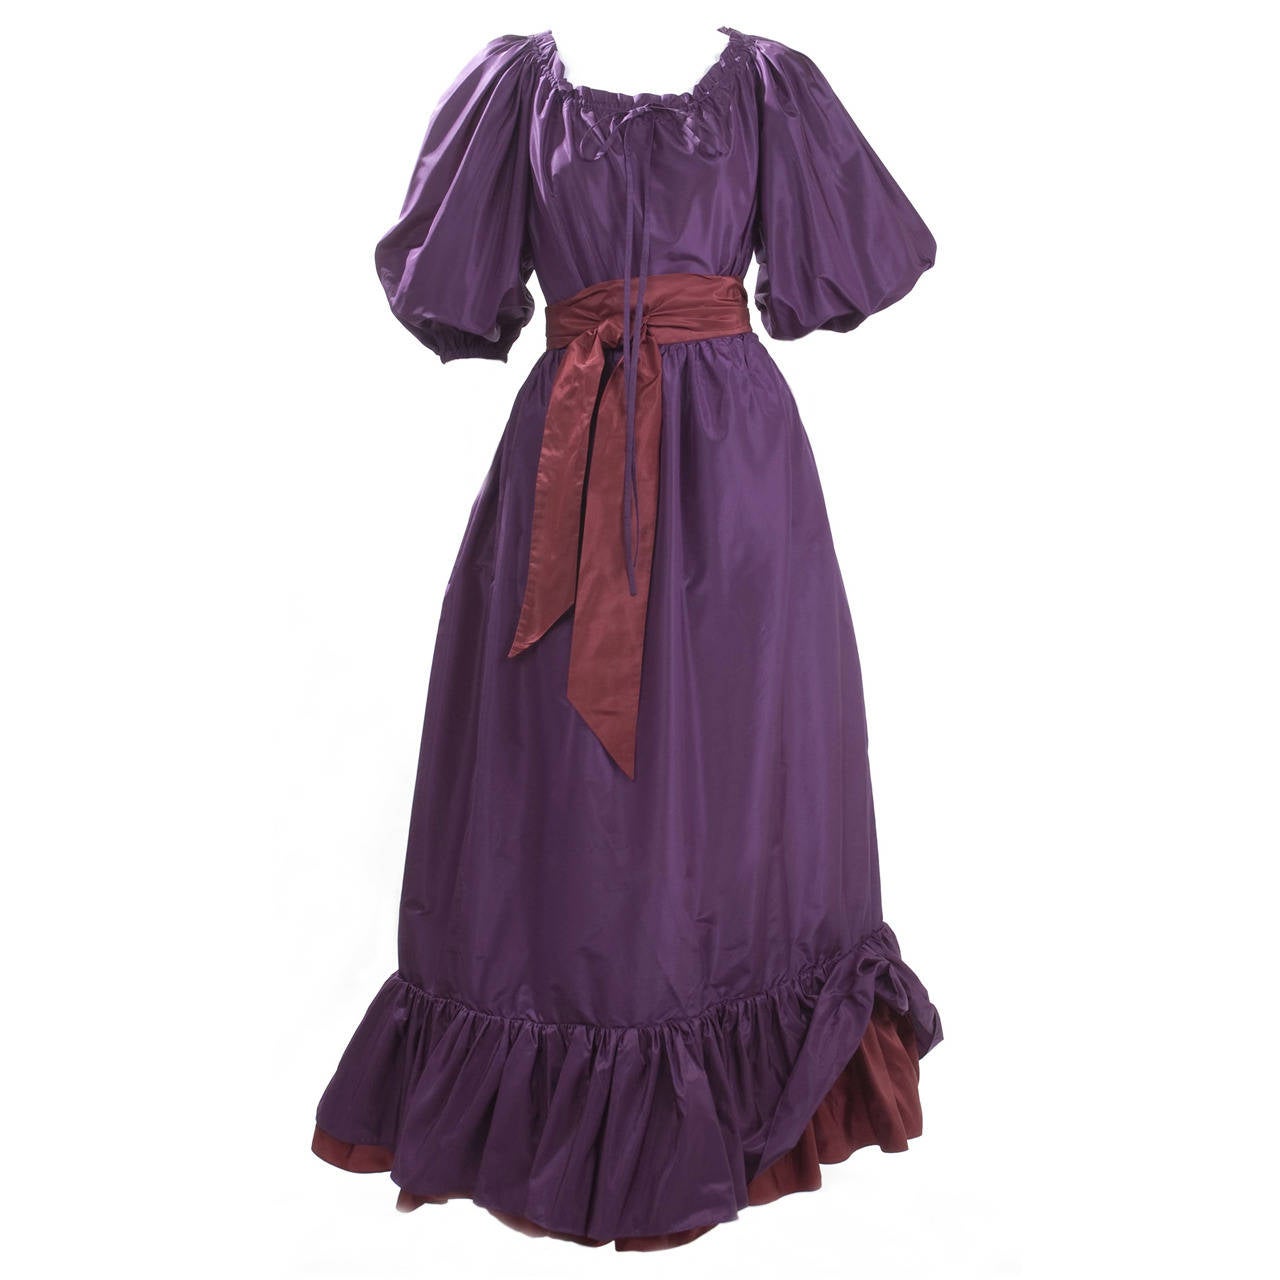 Yves Saint Laurent Taffeta Blouse, Skirt and Cape.
The blouse is solid purple and the skirt has a burgundy sash and the last ruffle is in the same color. The sash is attached to the skirt, pockets in the side seam.
The cape is a tone on tone play